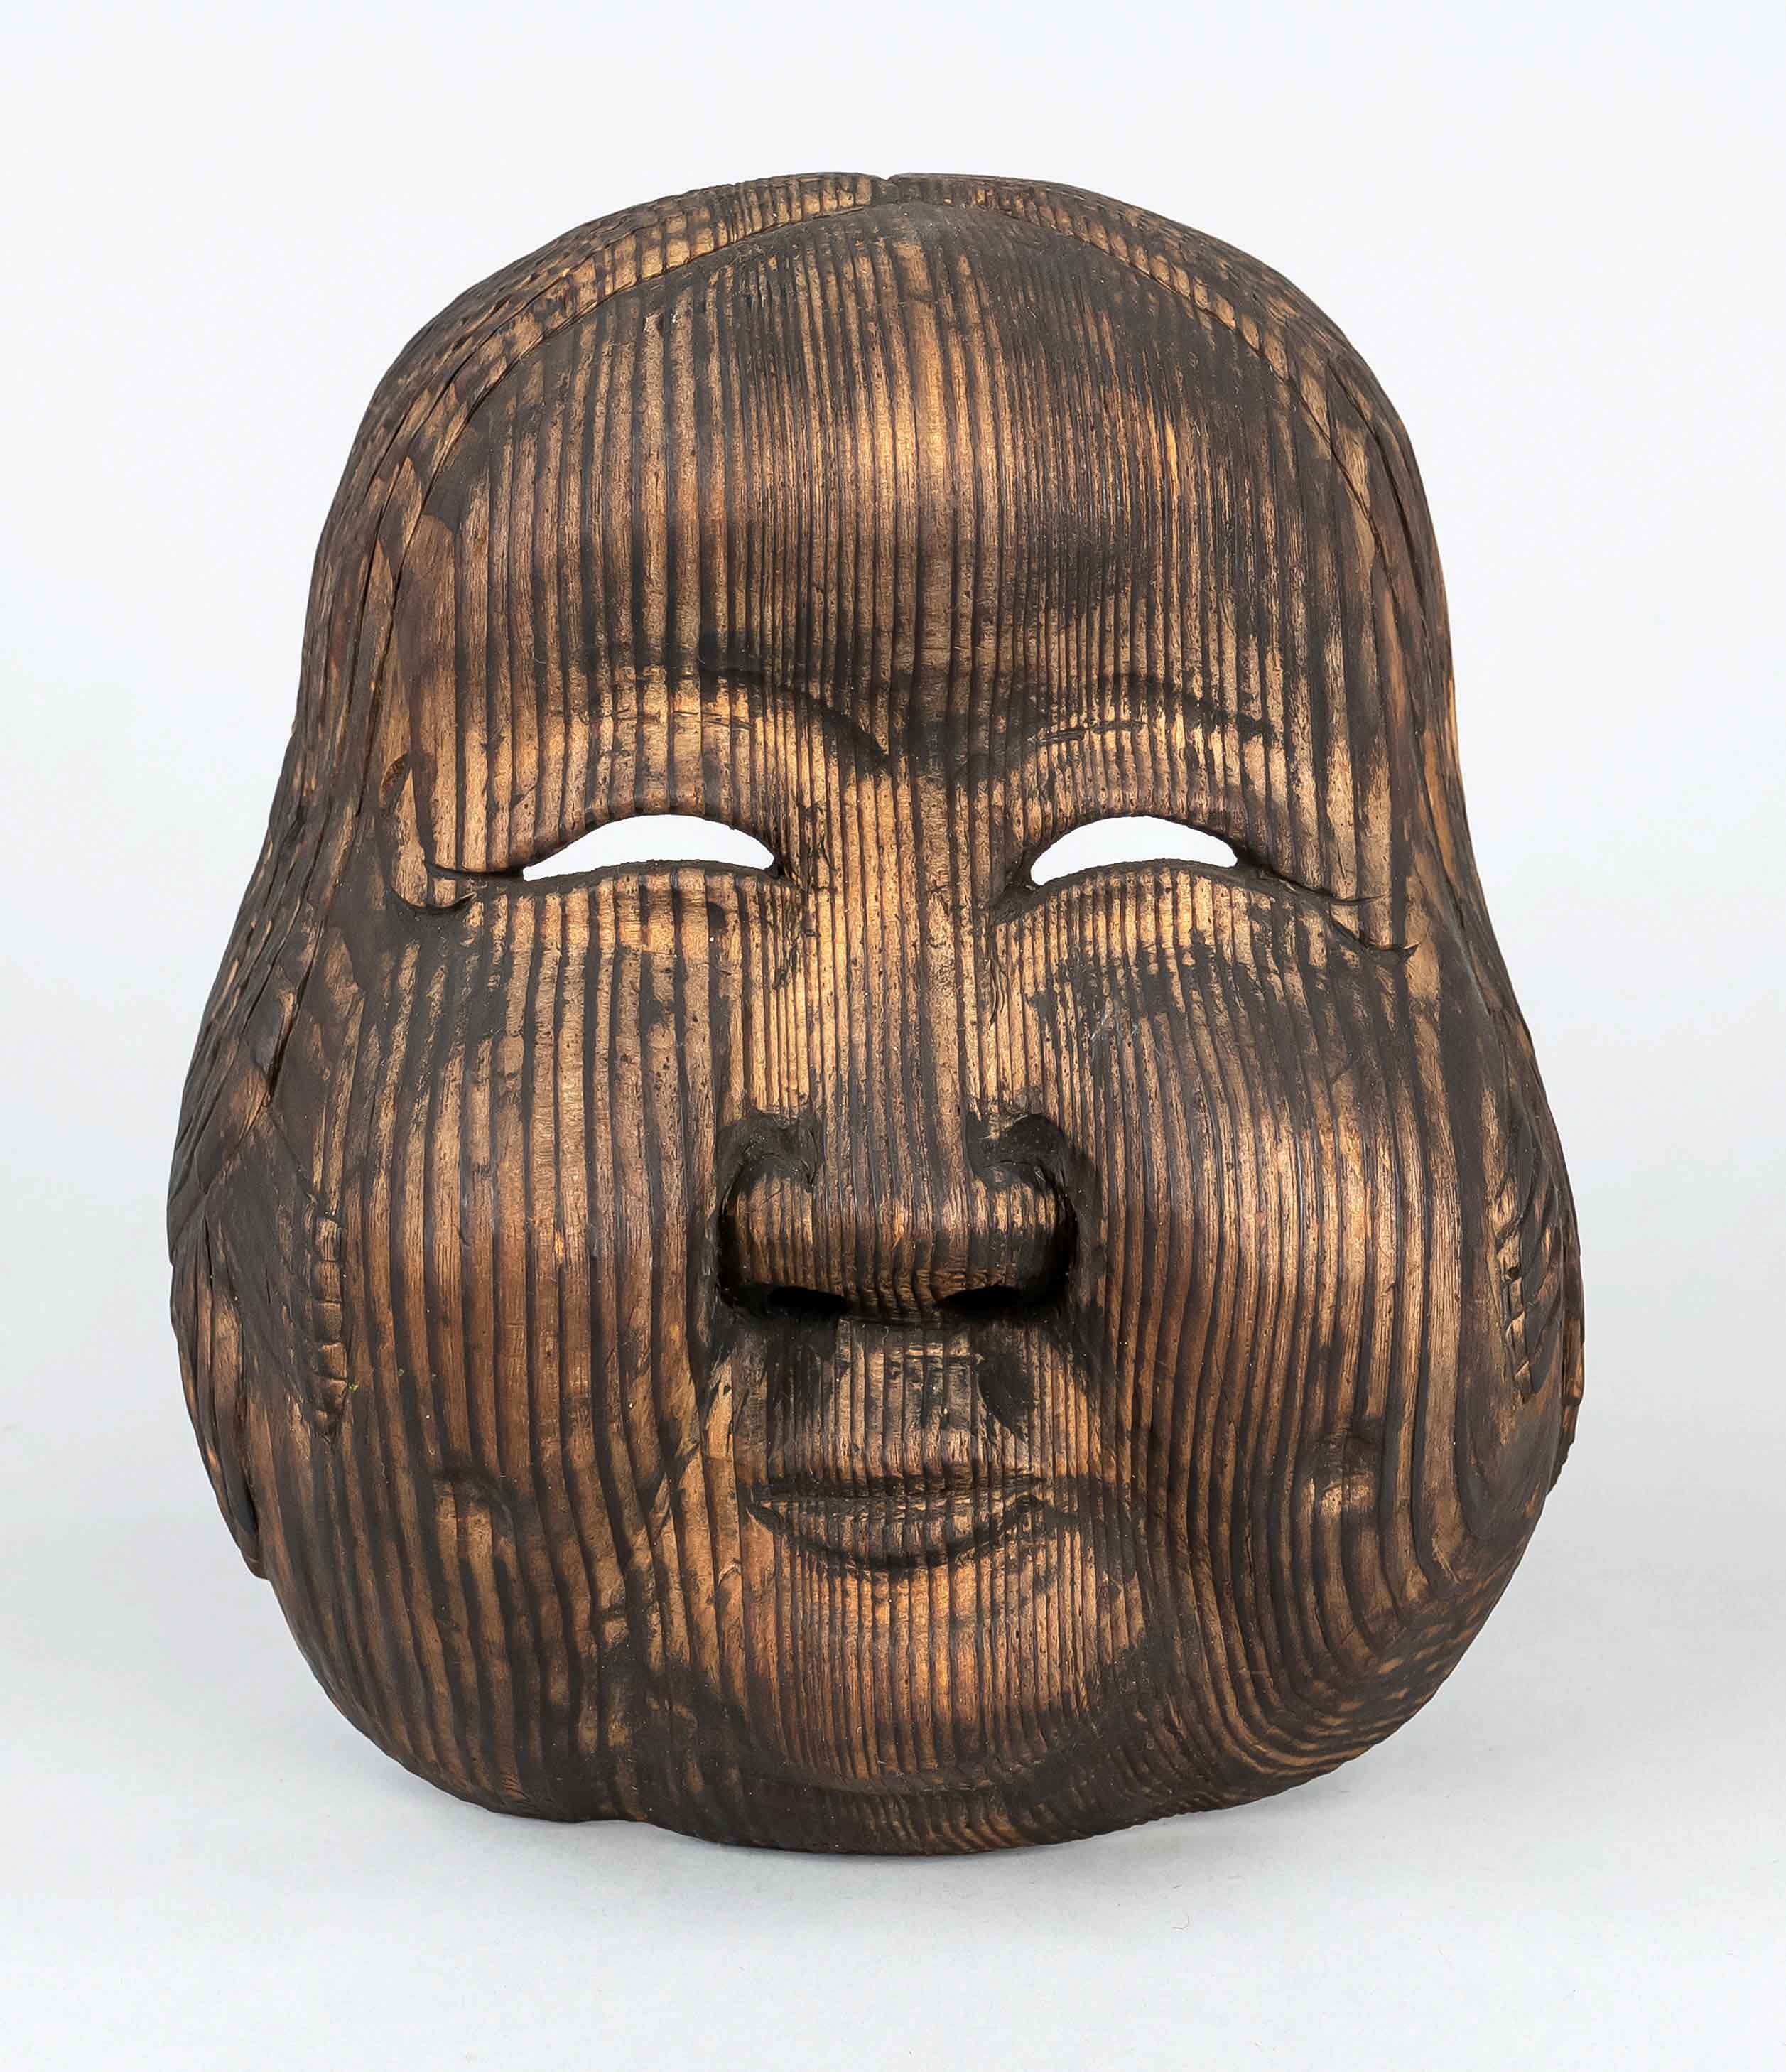 Kyogen mask of the Okame, Japan, Meiji period(1868-1912), 19th century, carved monochrome mask shell